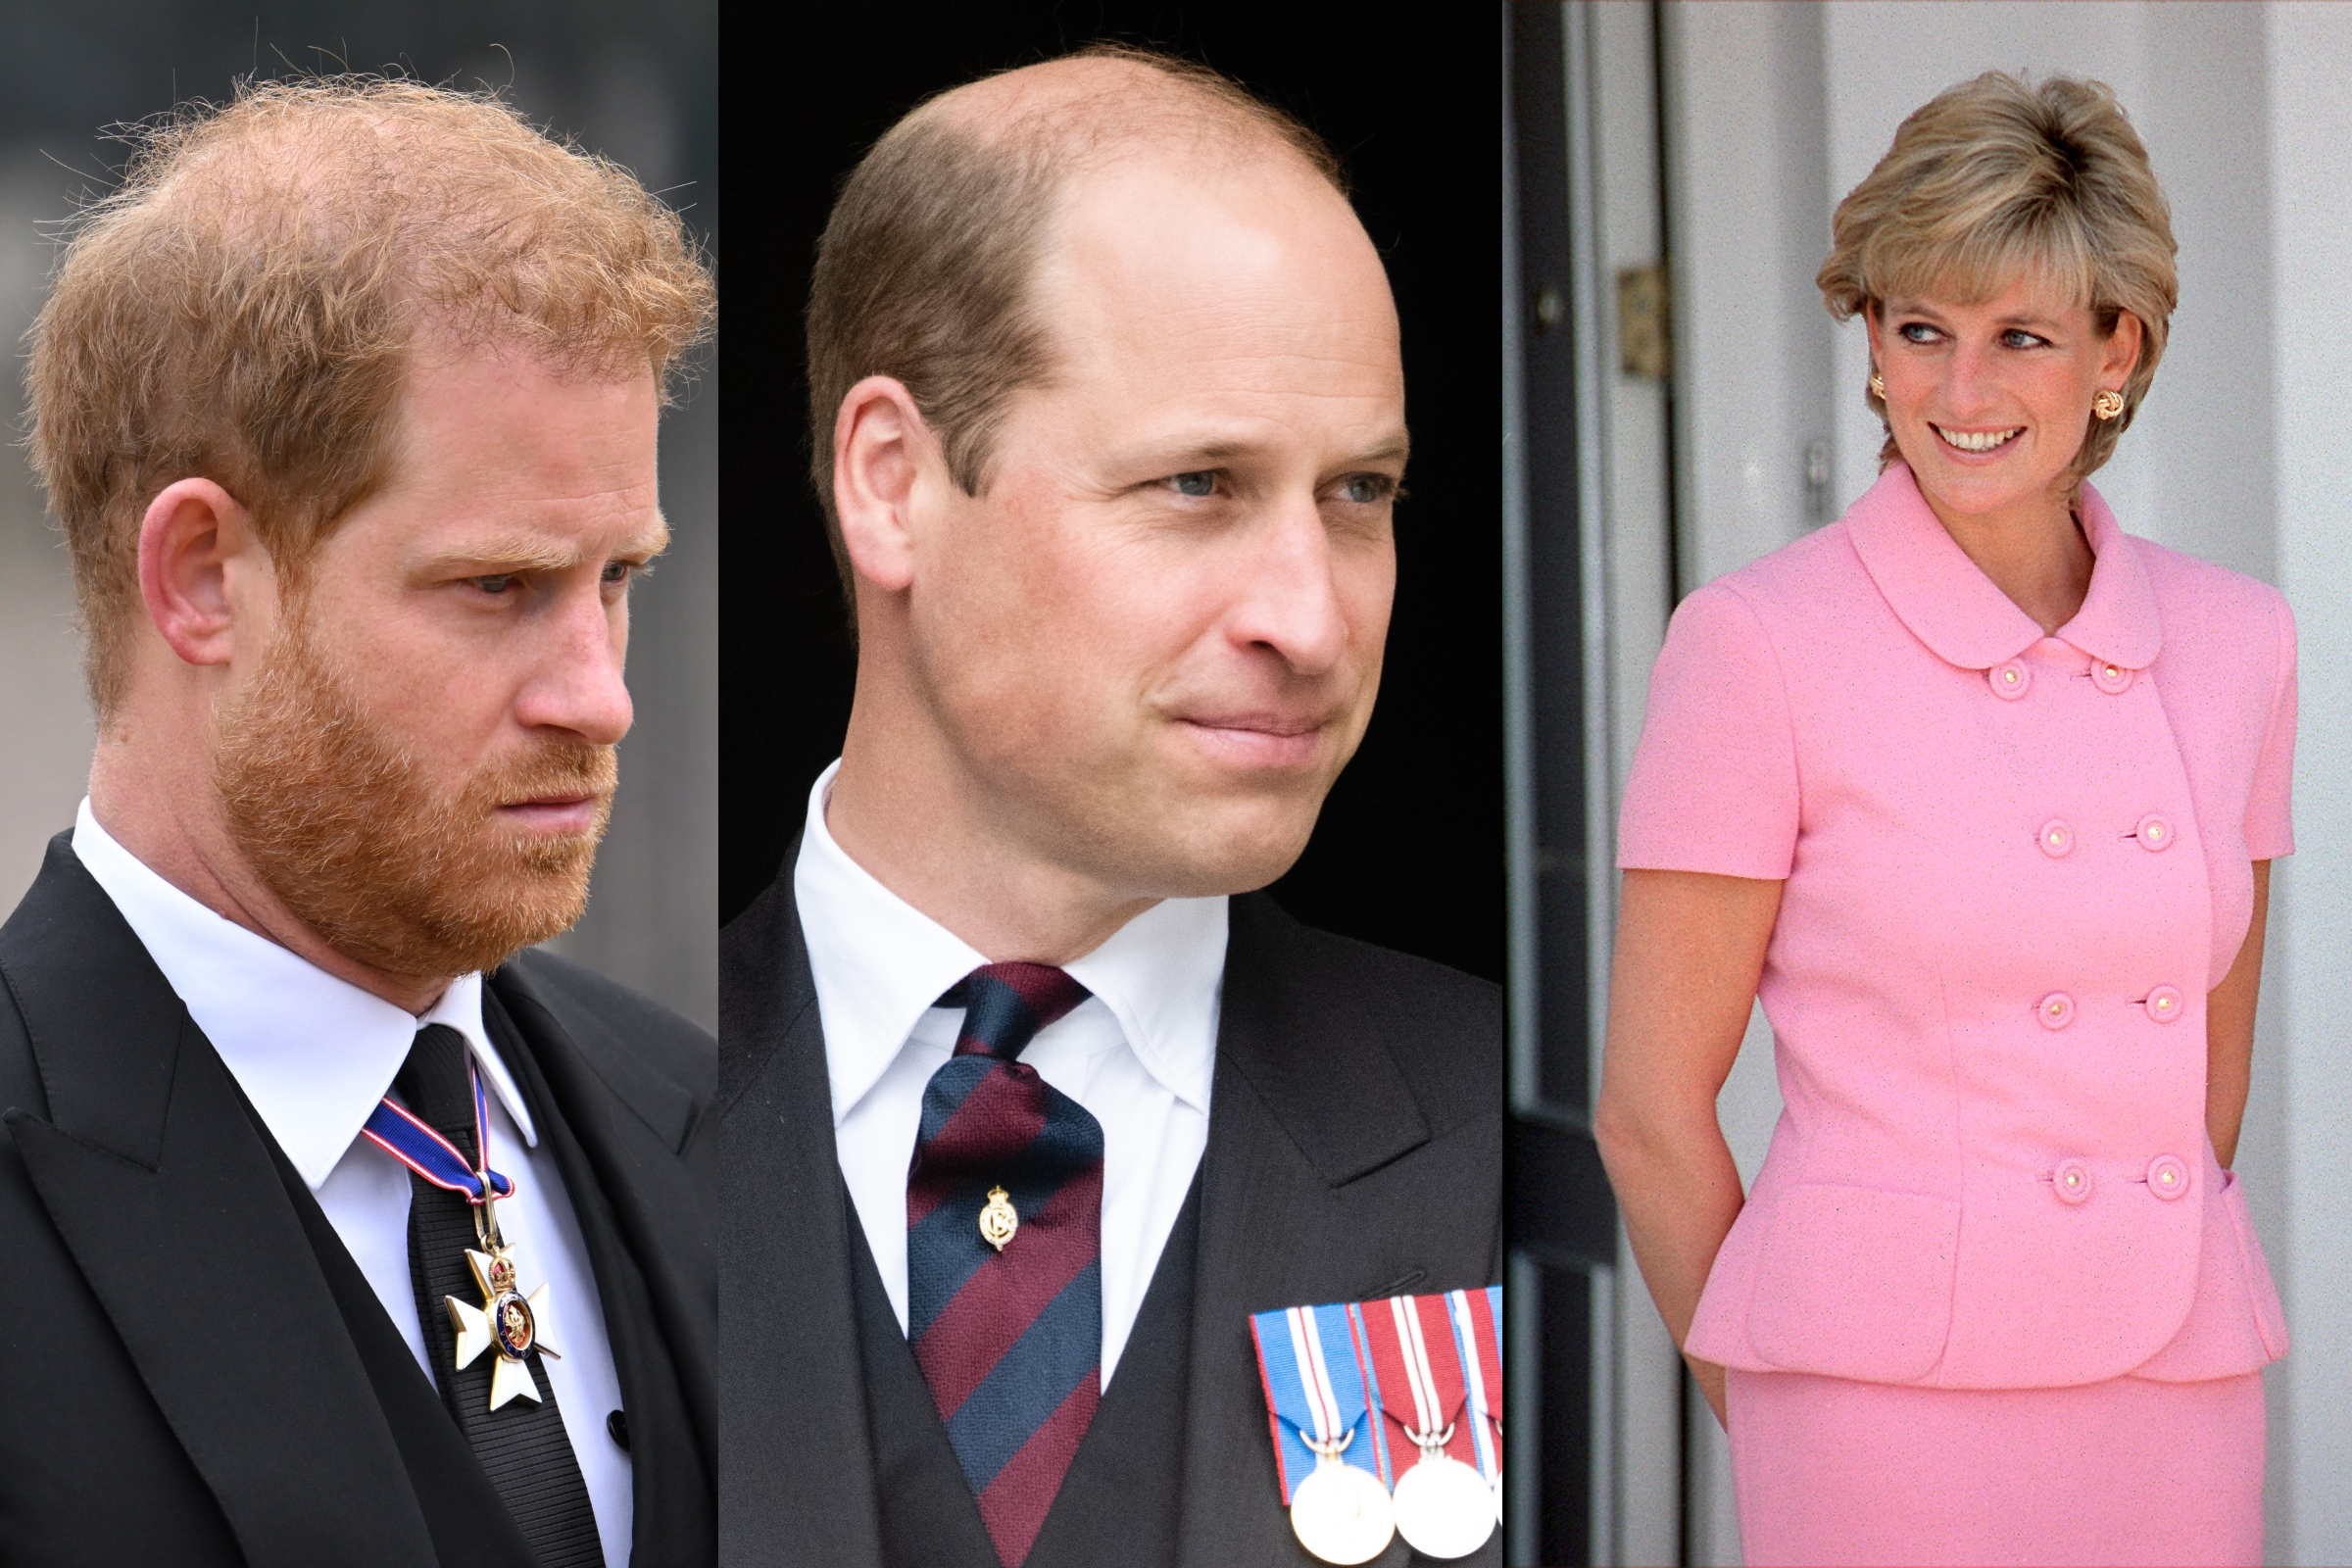 Prince Harry Slams William's 'Alarming' Baldness, Lack of Diana Resemblance